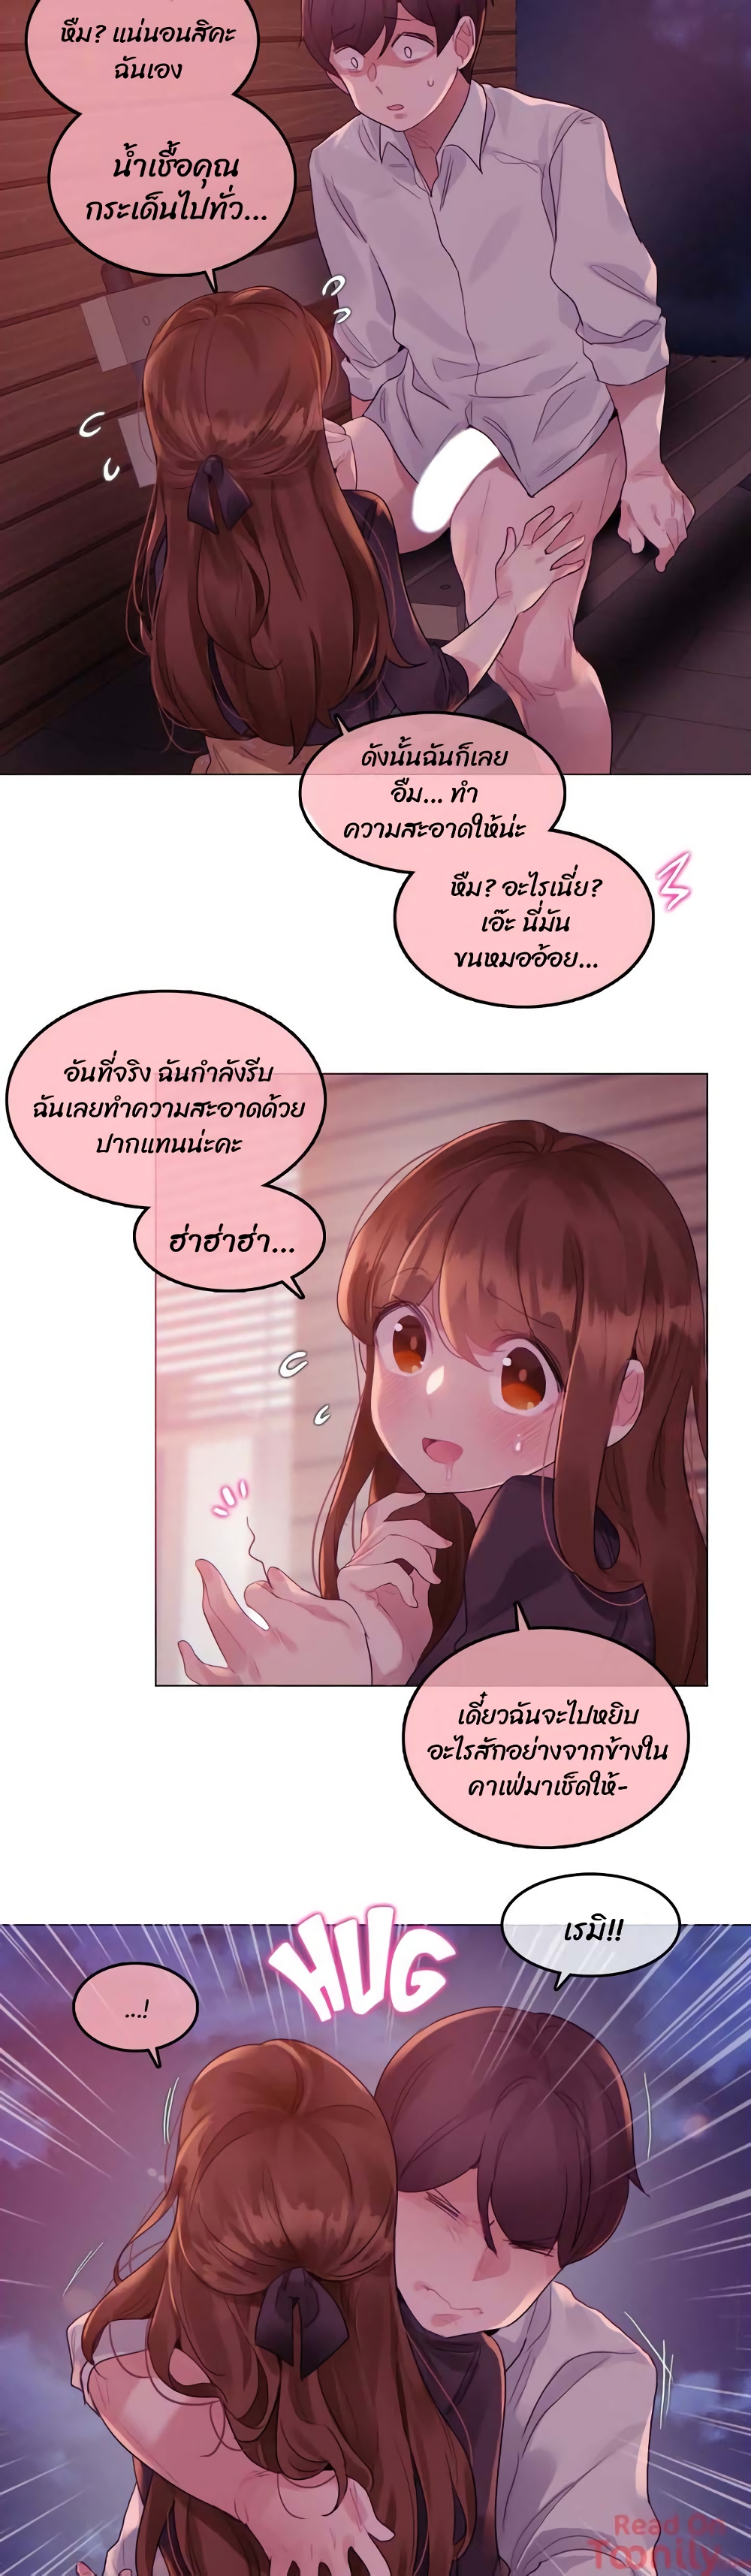 A Pervert’s Daily Life05